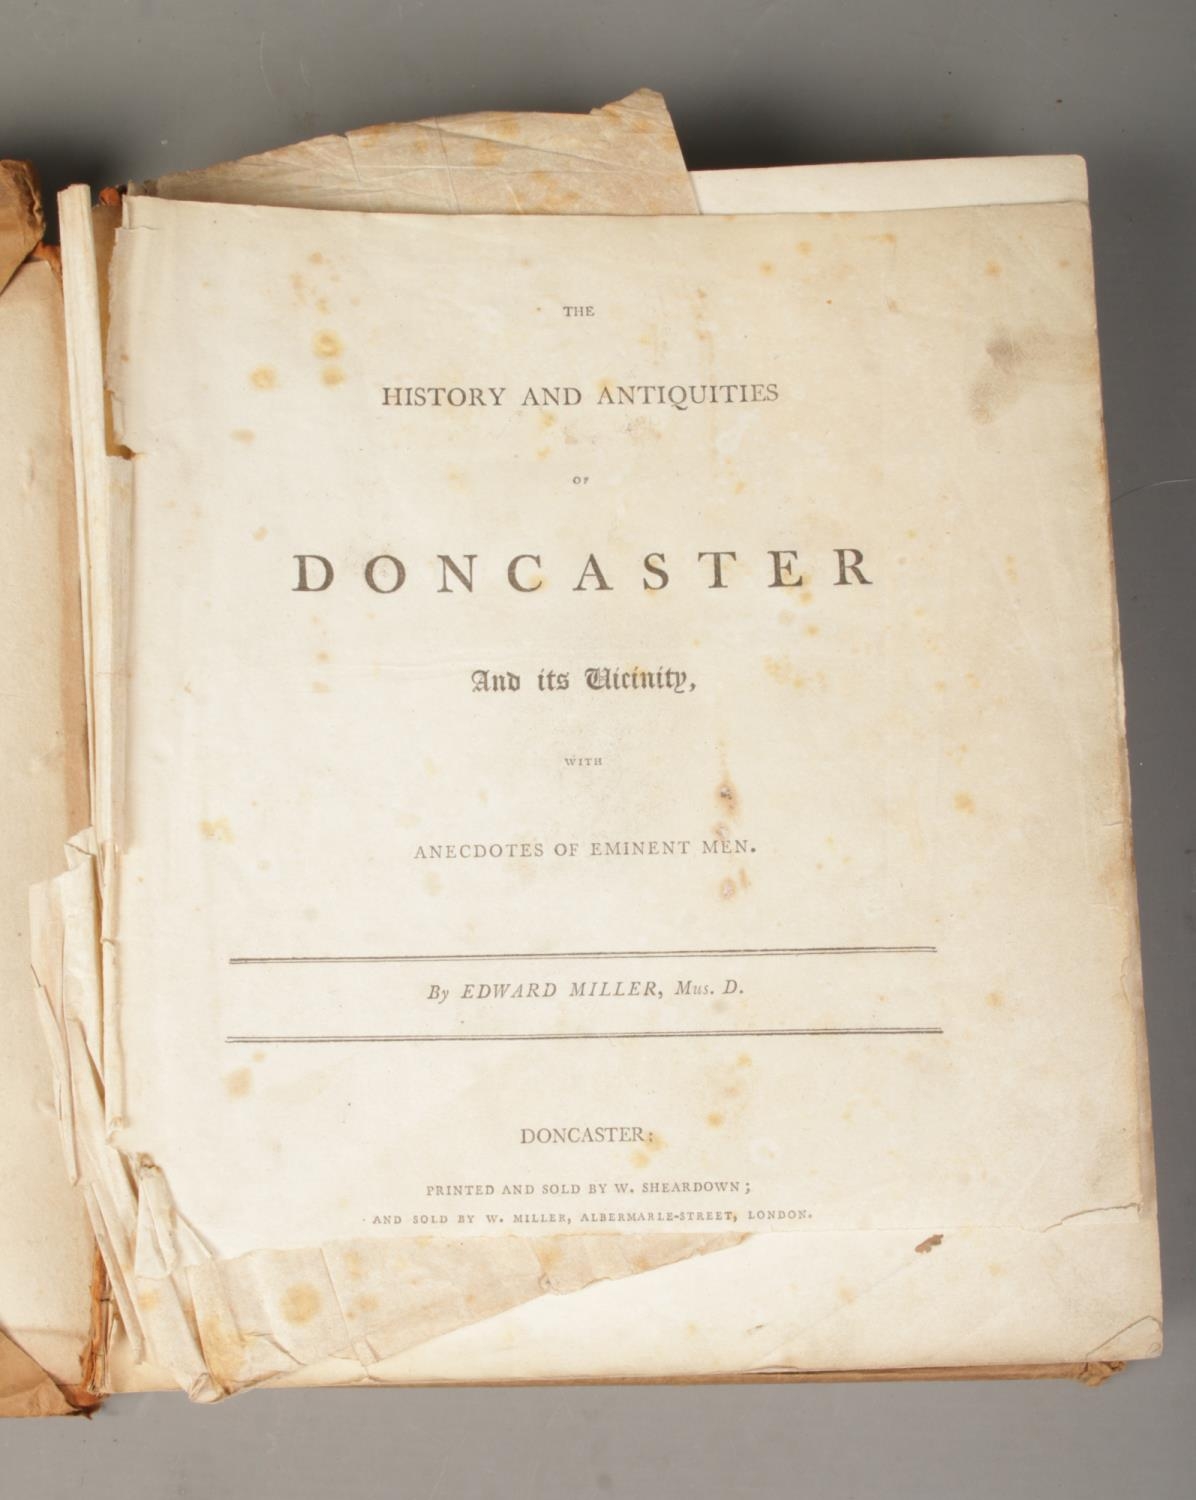 Local Interest; Doncaster. Edward Miller; The History and Antiquities of Doncaster and its Vicinity. - Image 2 of 6